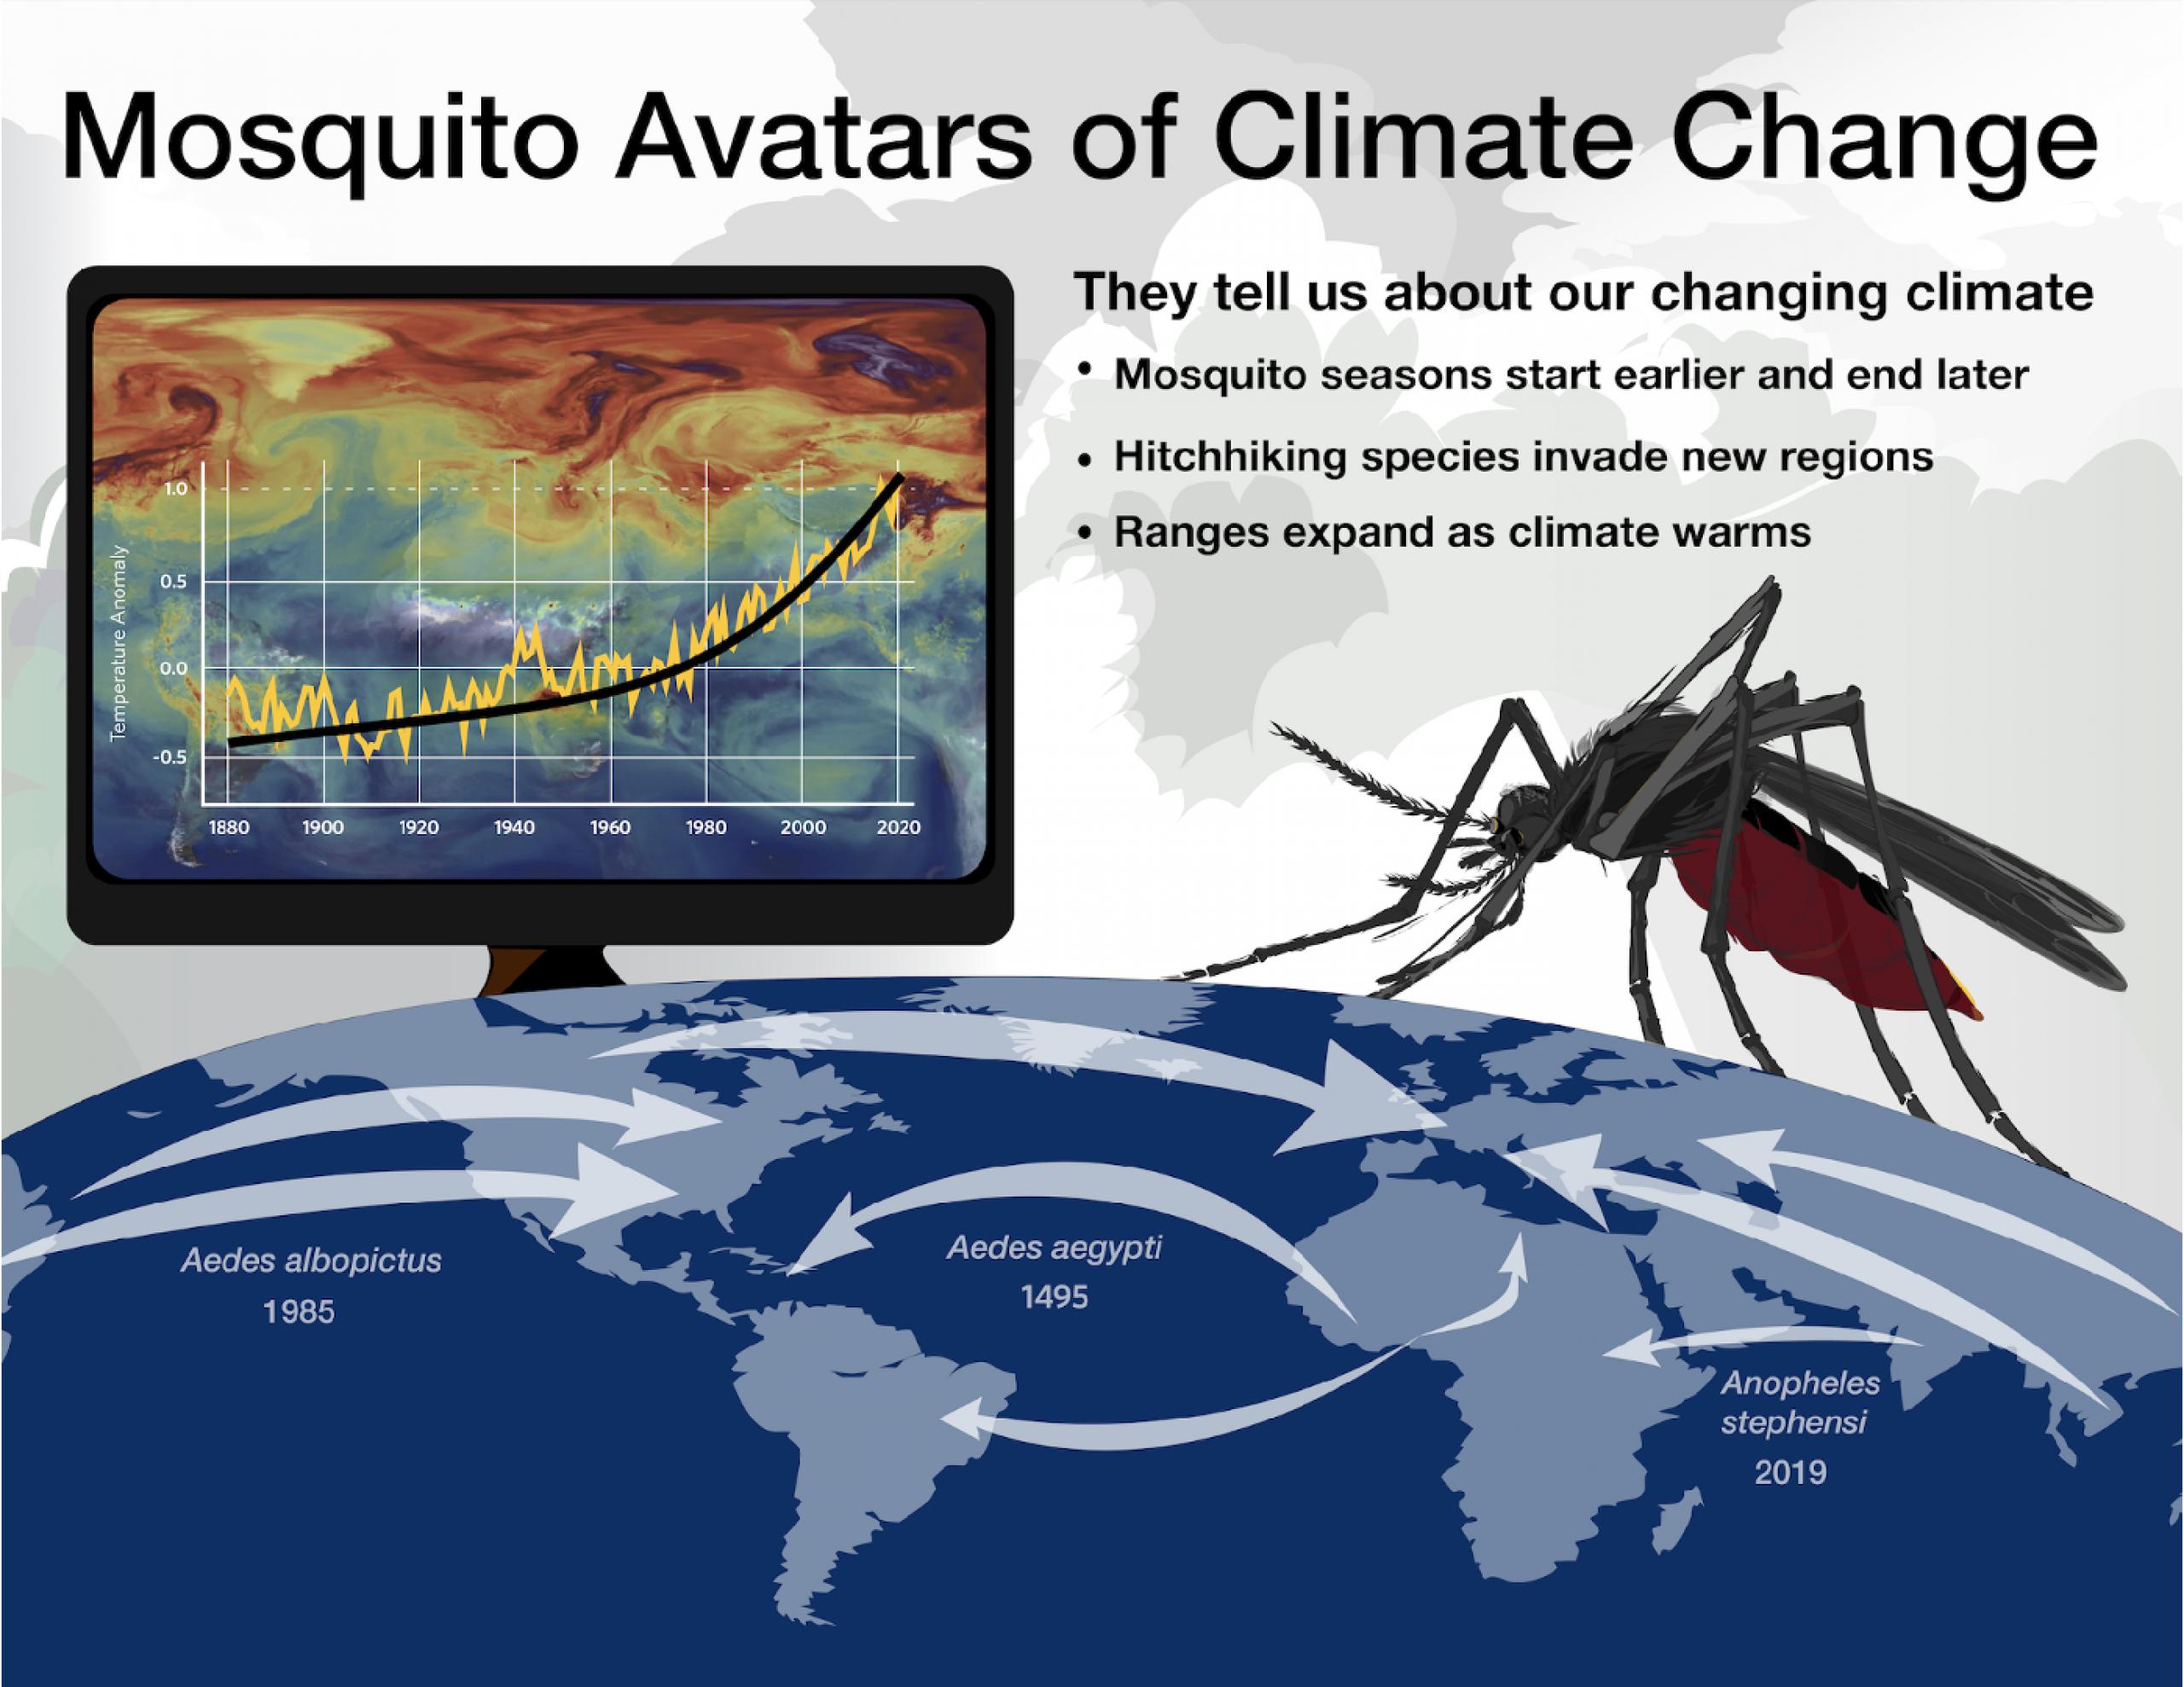 Graphic from presentation showing the connection between mosquitoes and climate change